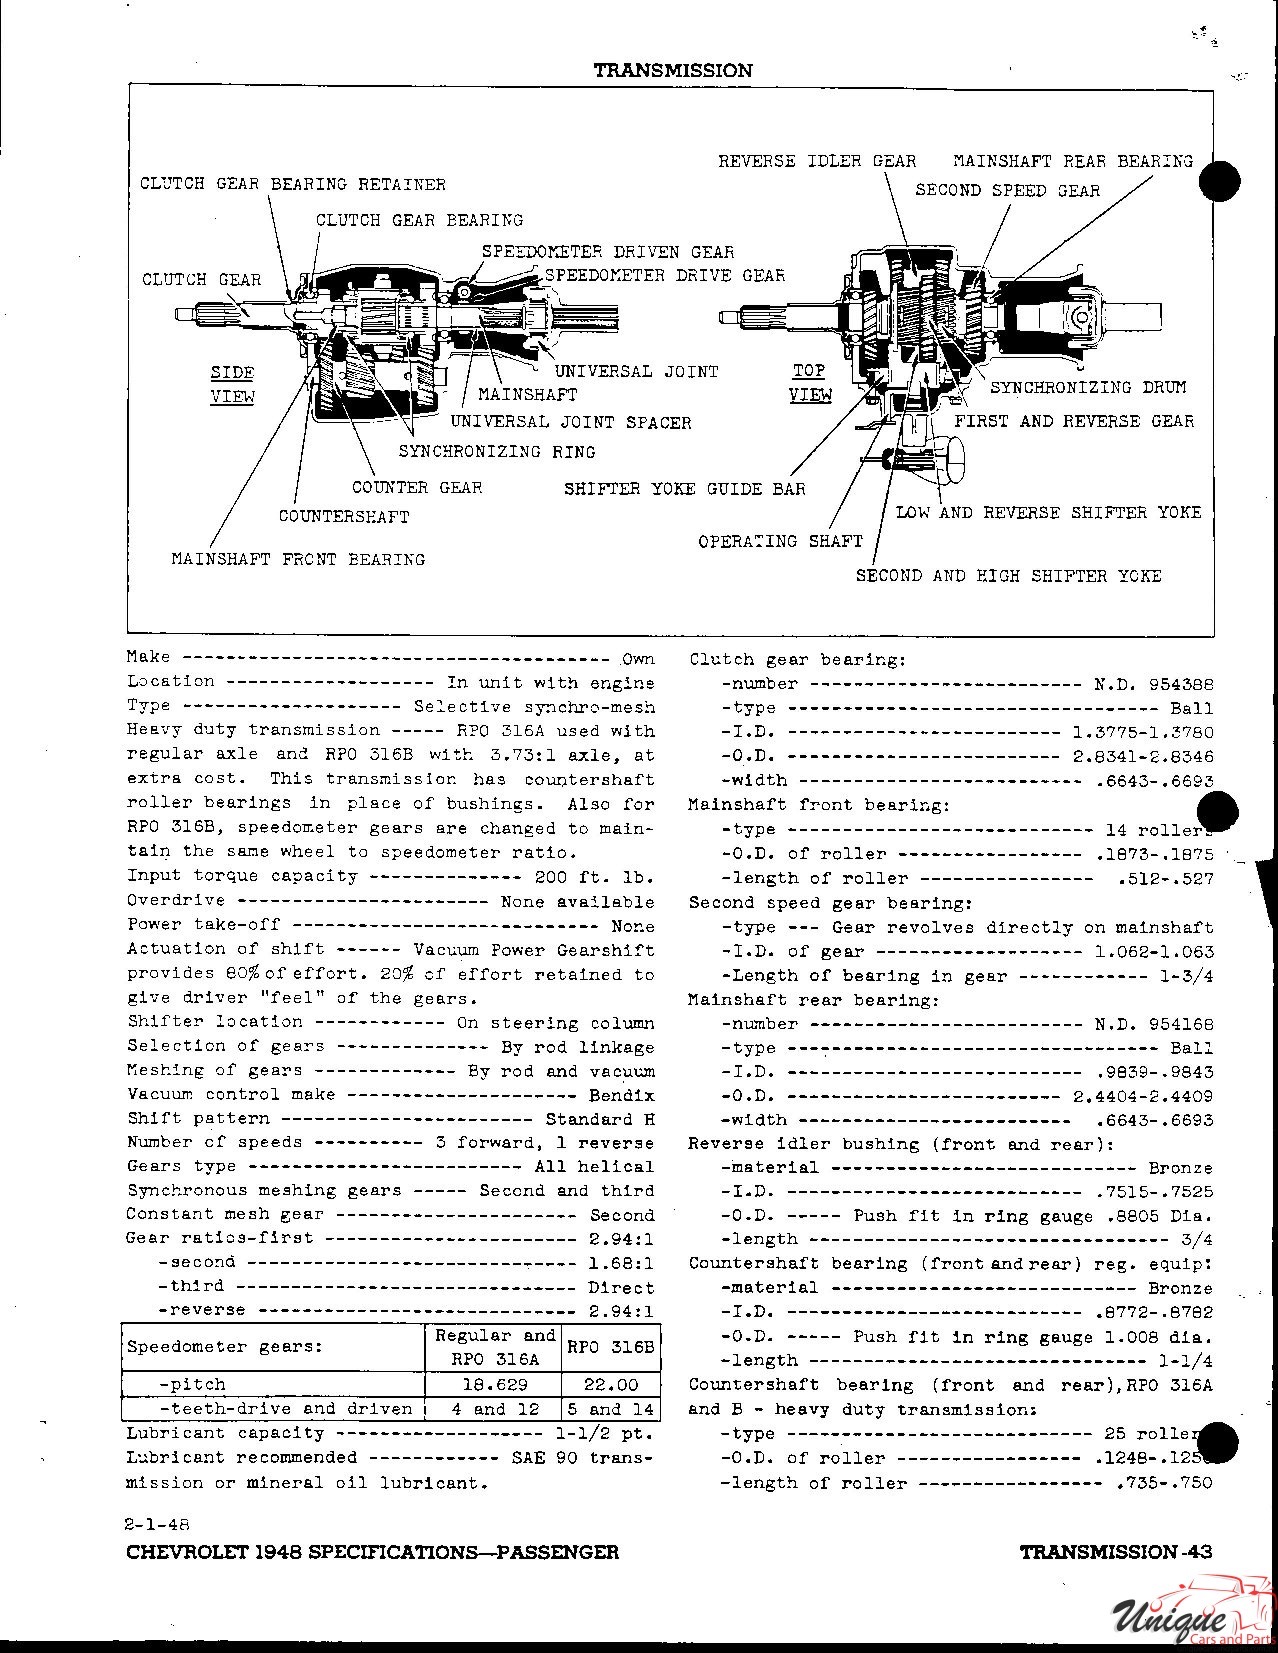 1948 Chevrolet Specifications Page 19